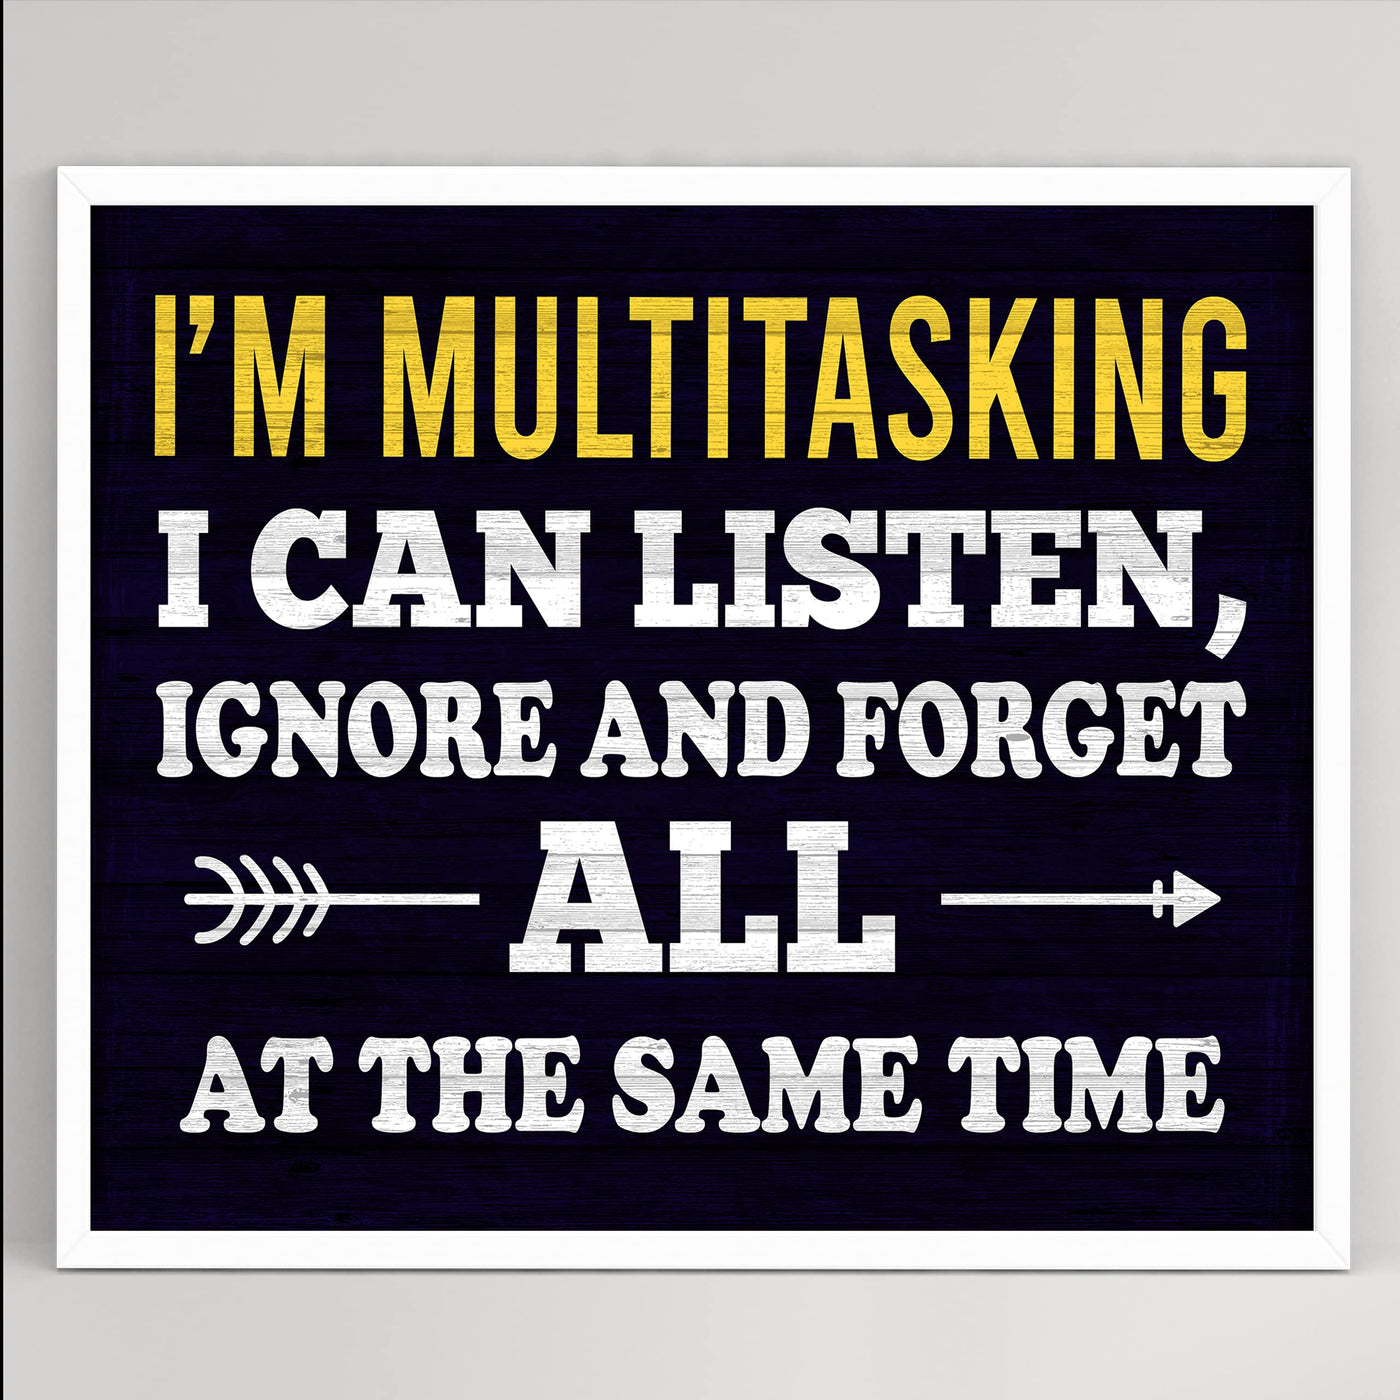 Multitasking-Can Listen, Ignore & Forget At Same Time Funny Office Wall Sign -10x8" Sarcastic Art Print-Ready to Frame. Humorous Home-Bar-Shop-Cave Decor. Great Desk-Cubicle Sign. Fun Novelty Gift!